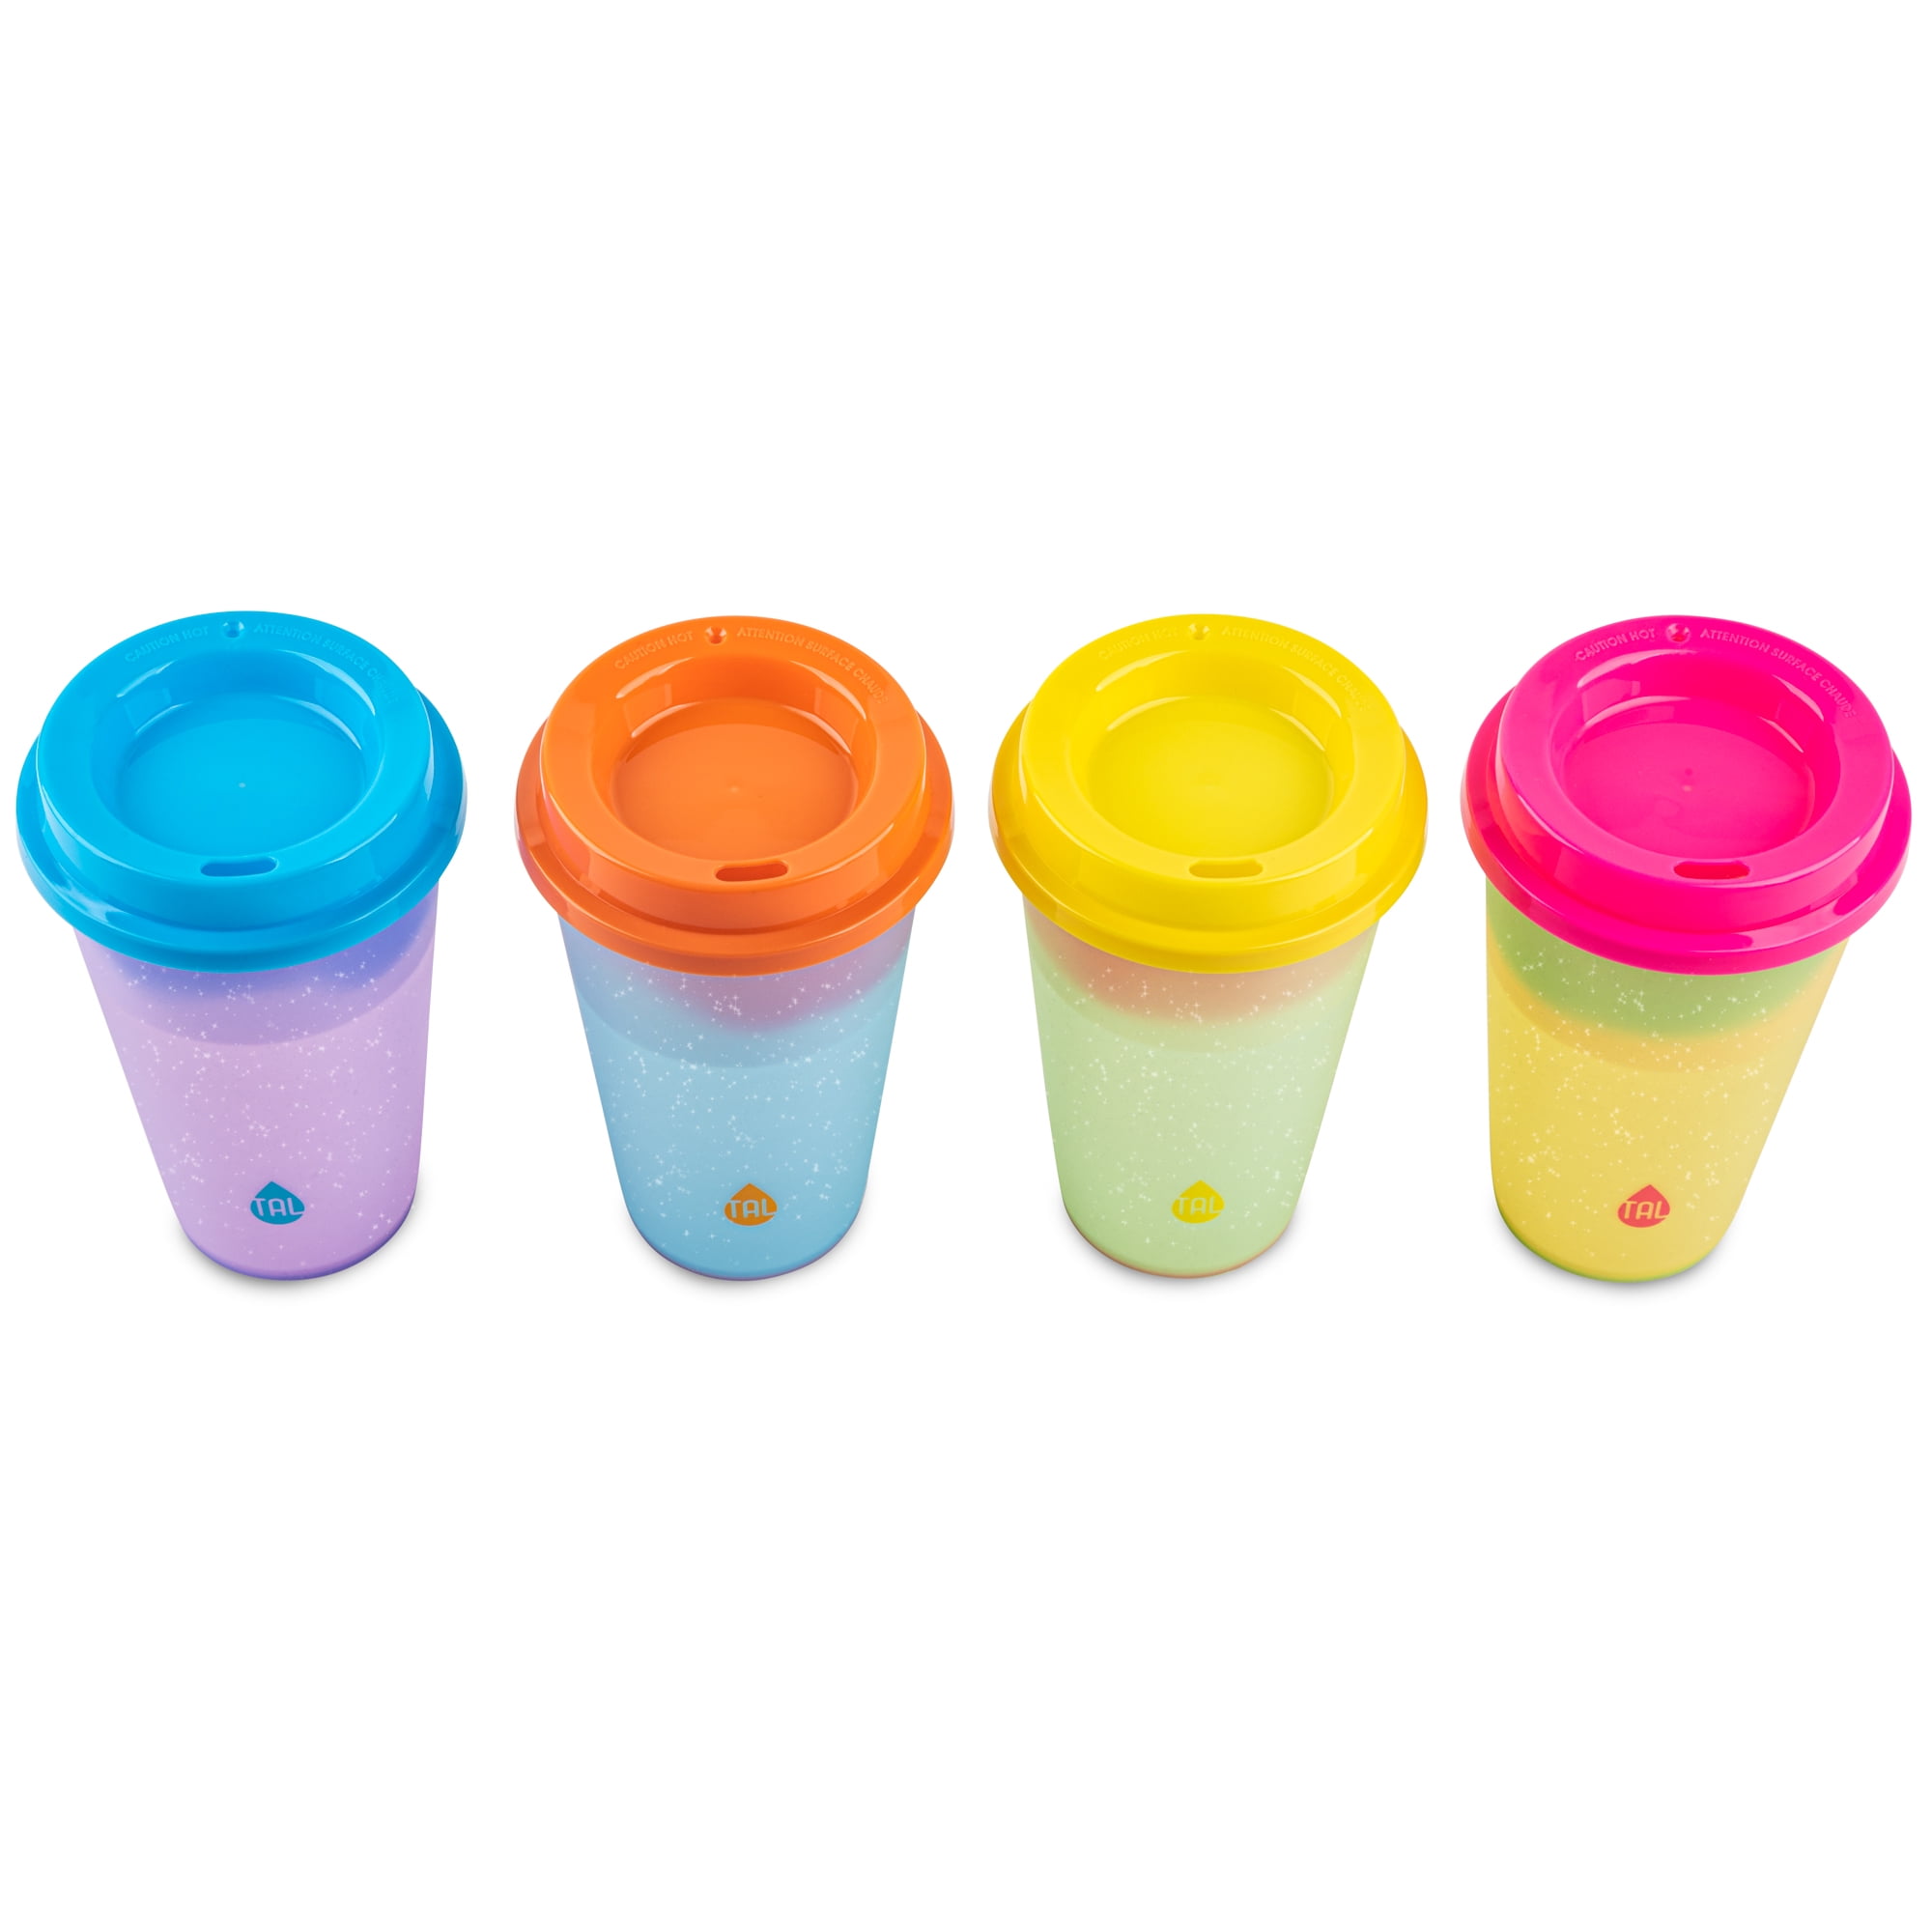 Bling color changing cup